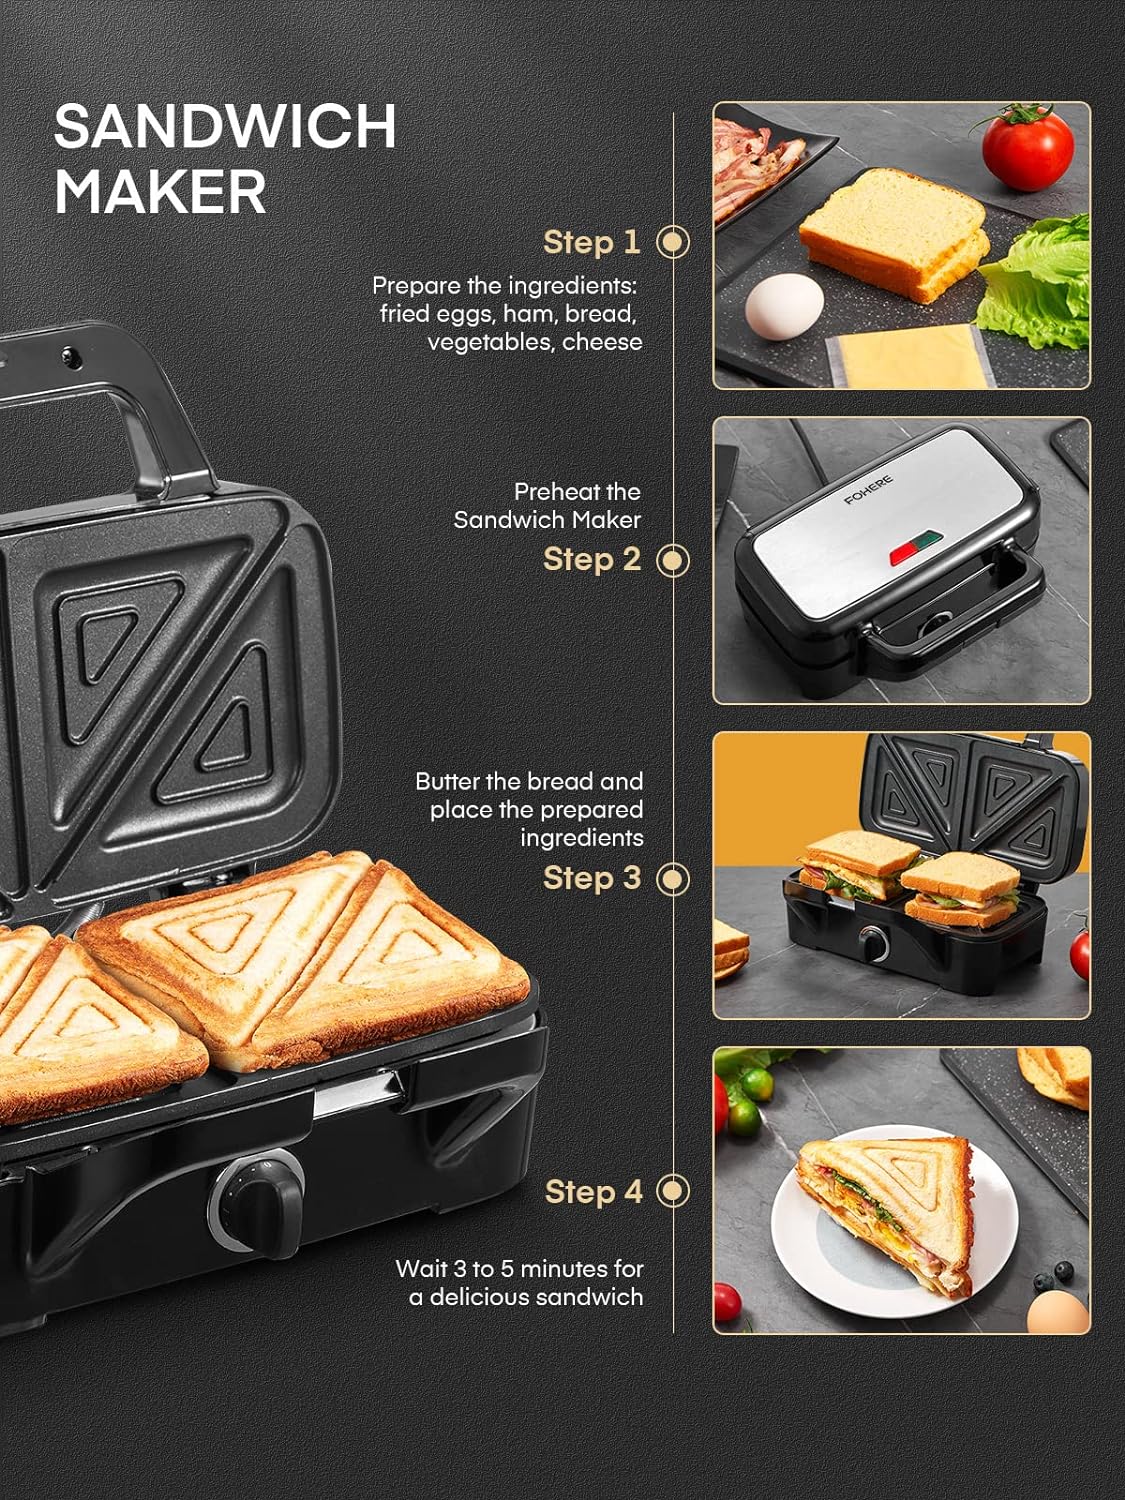  FOHERE 3-in-1 Sandwich Maker, Waffle Maker, Sandwich Grill,  Portable Electric Panini Press with Removable Non-Stick Plates, LED  Indicator Lights, Cool Touch Handle, Toaster, Grilled Cheese Machine: Home  & Kitchen